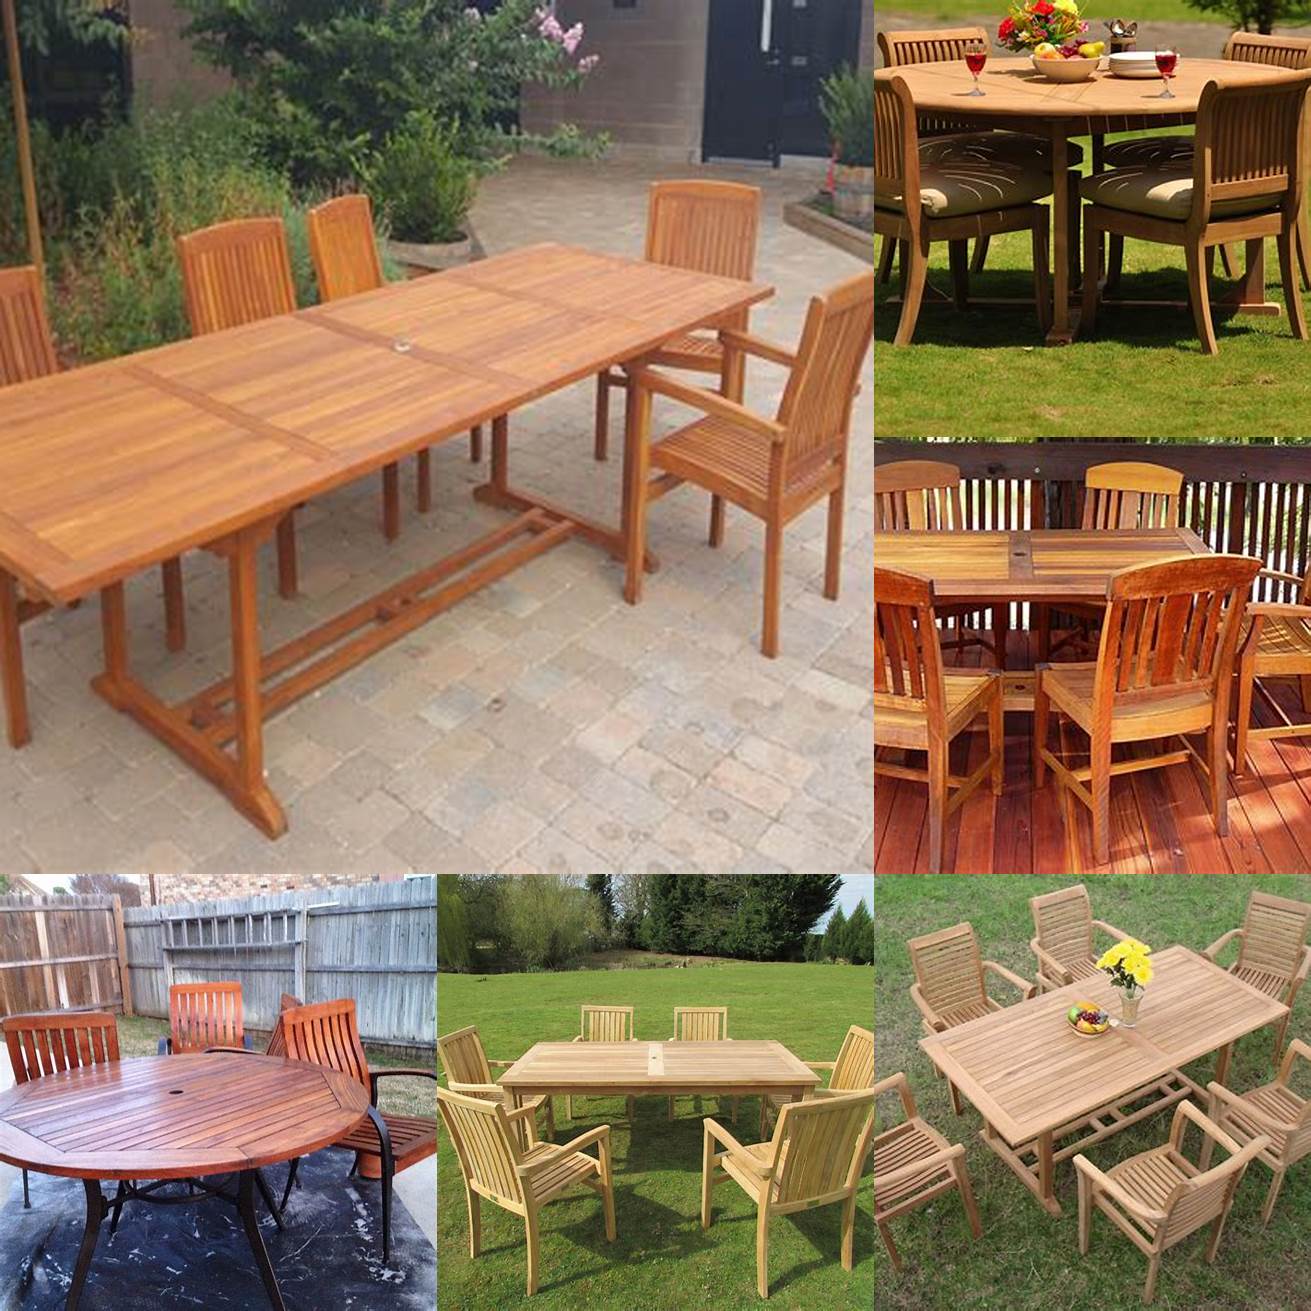 Teak Wood Furniture in Different Uses